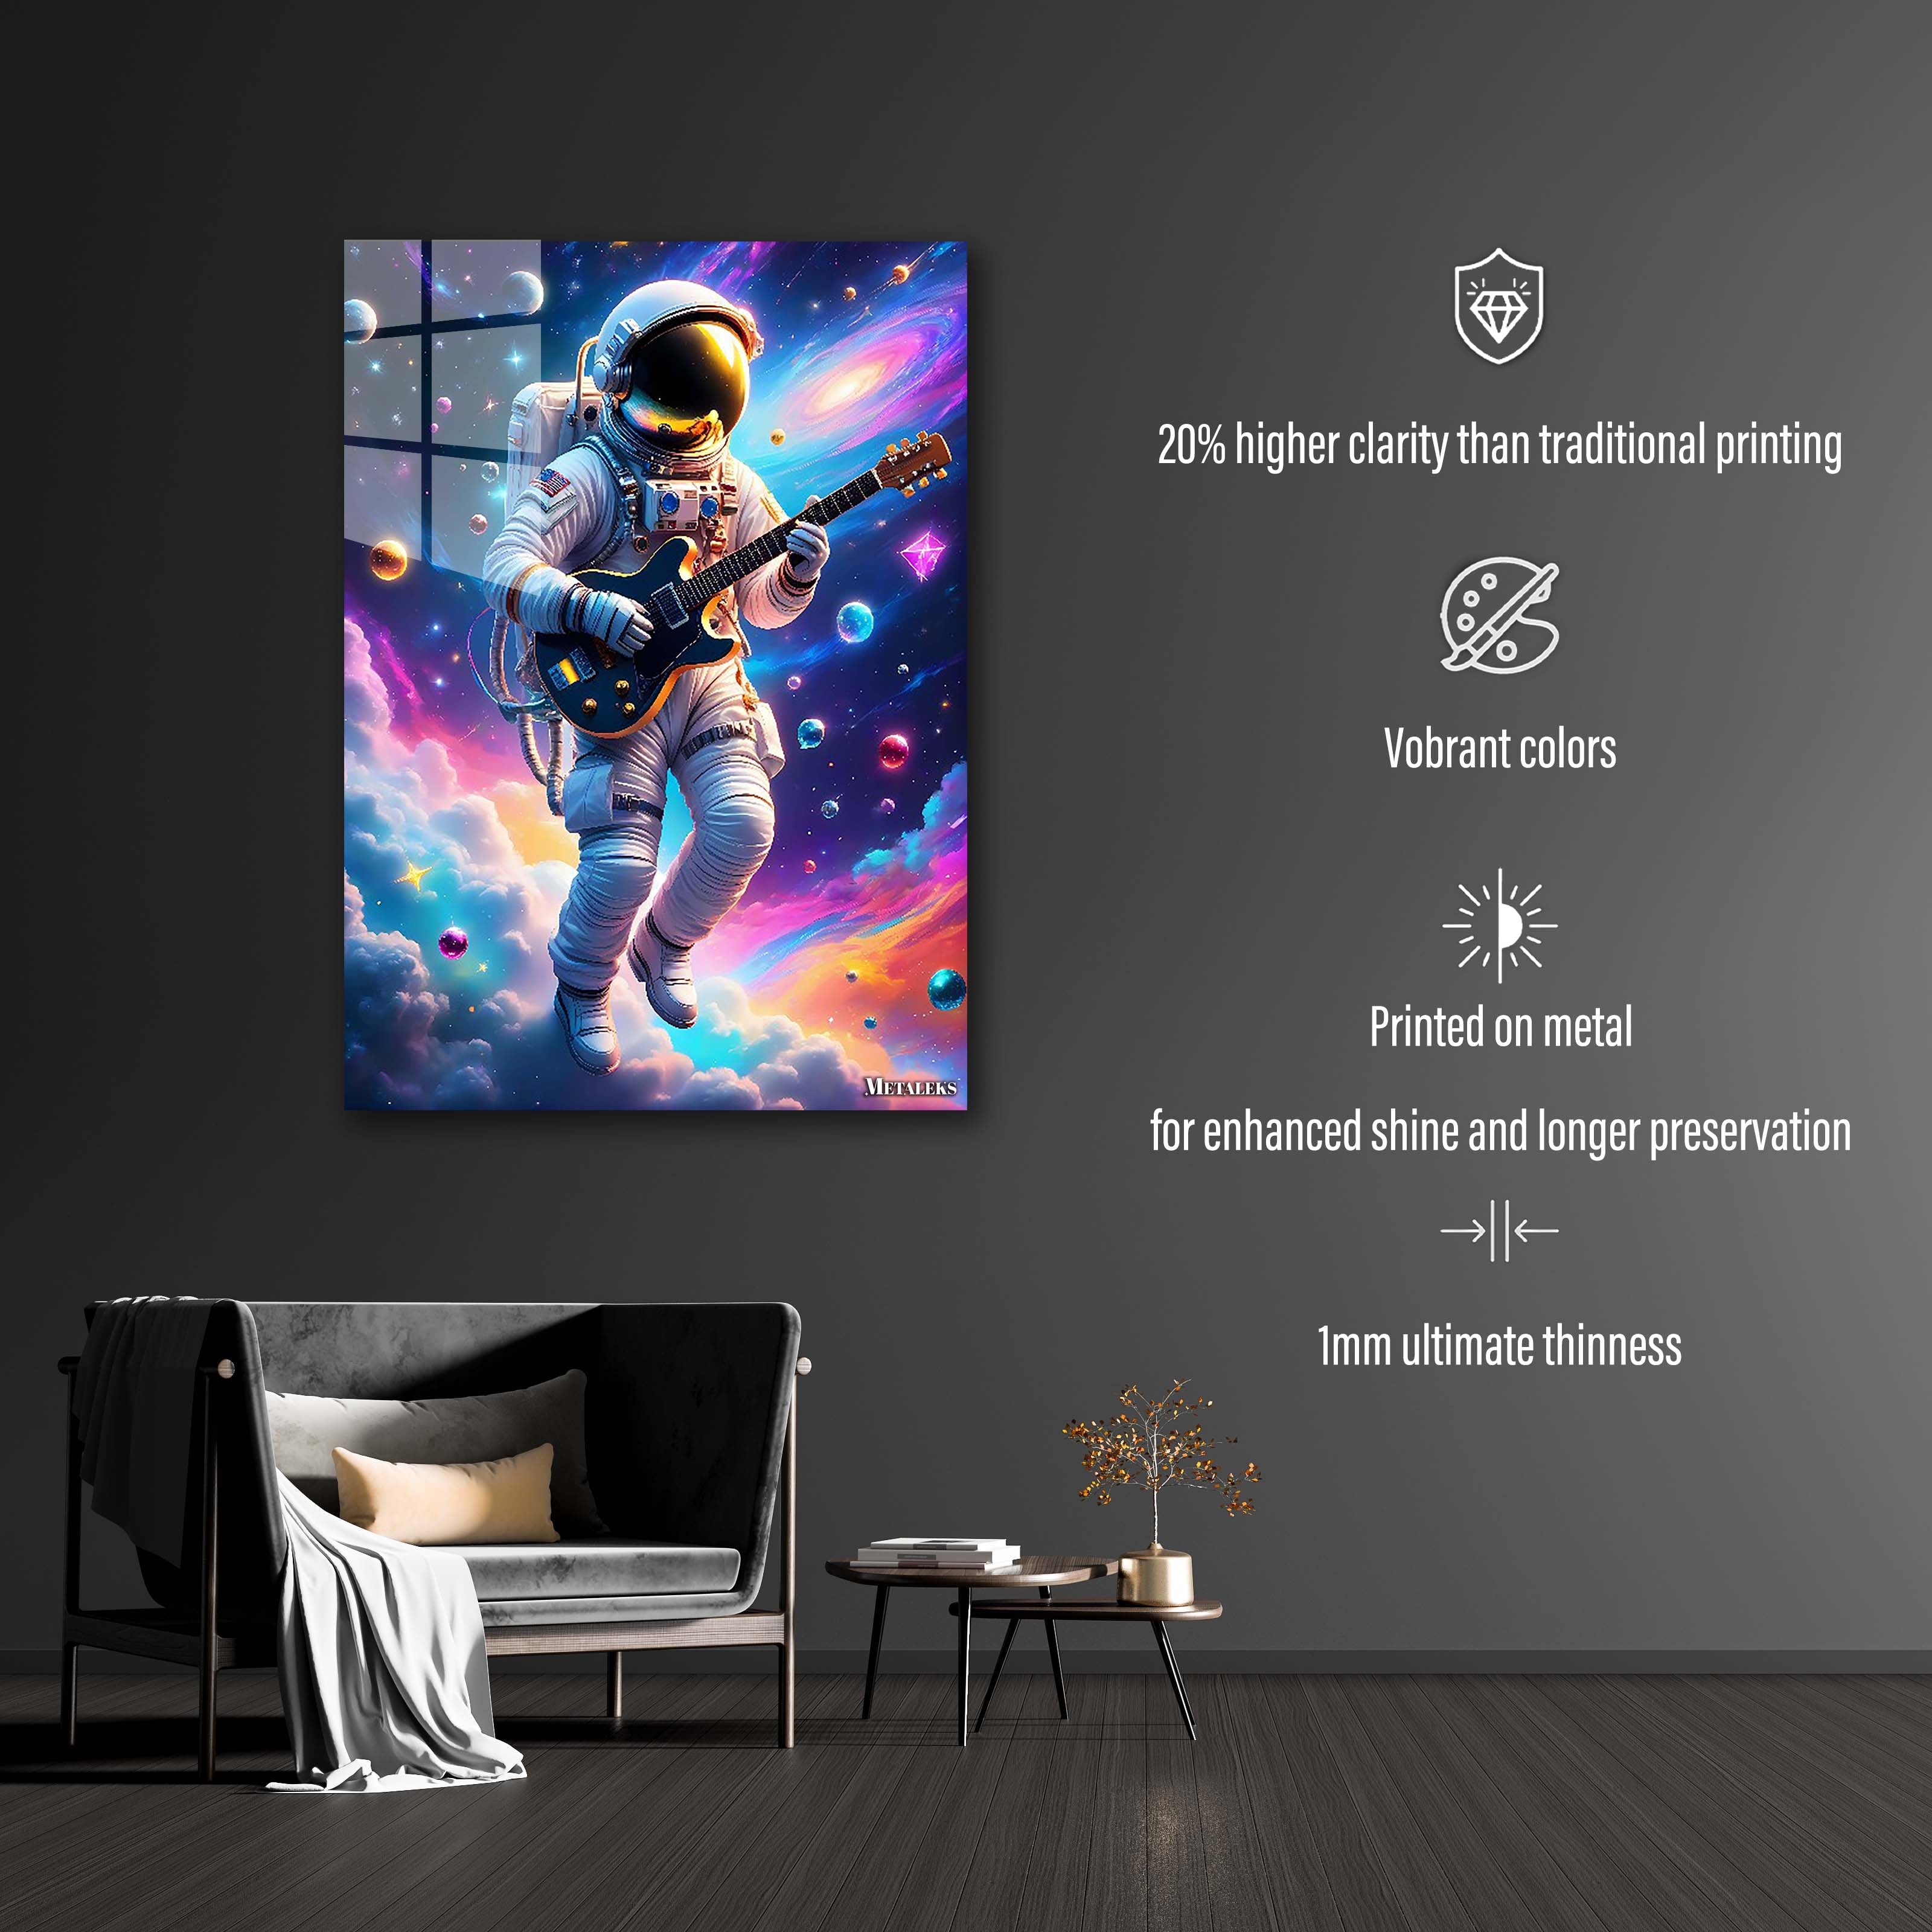 Astronaut with Guitar-designed by @Lucifer Art2092